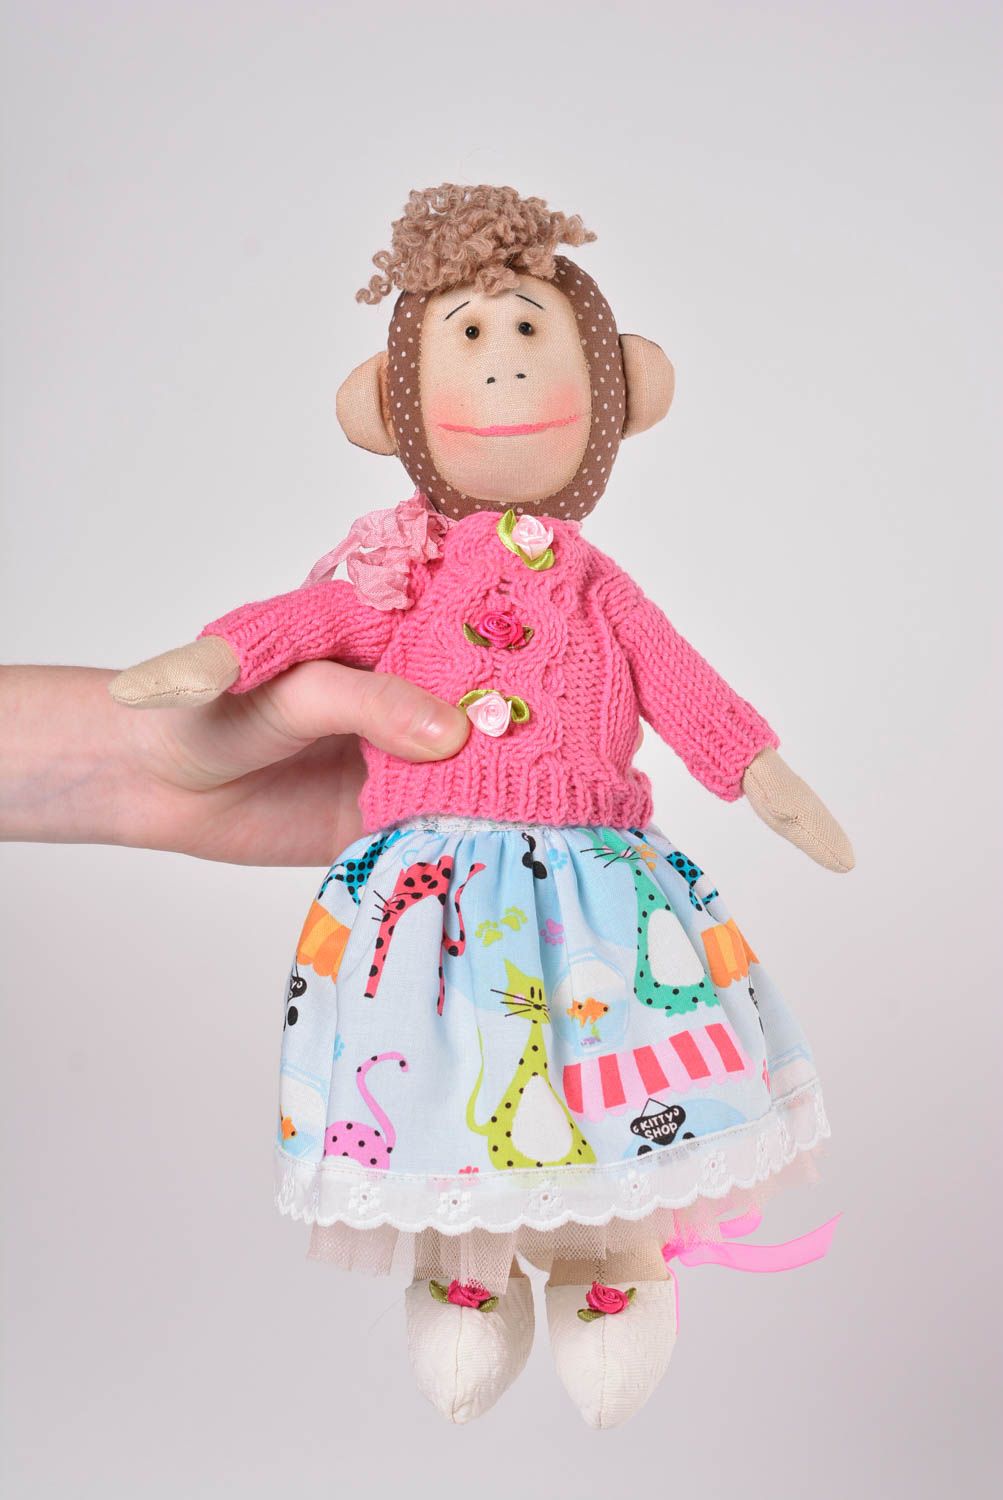 Handmade fabric soft toy rag doll stuffed toy for kids living room designs photo 5